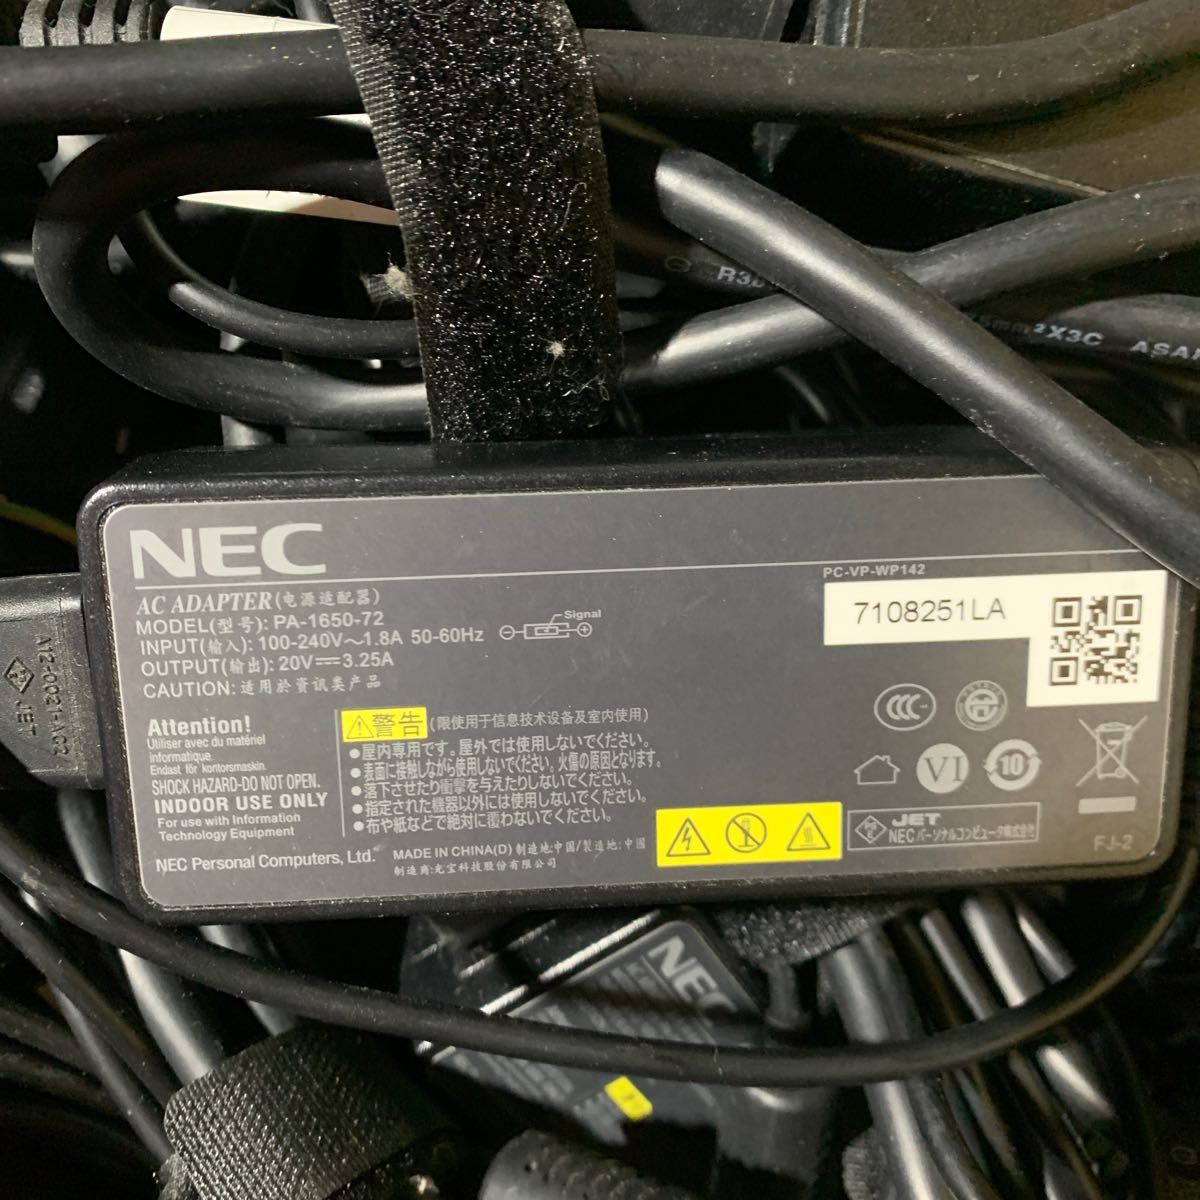  used operation goods genuine products NEC 20V 3.25A AC adaptor PC-VP-WP142/ PA-1650-72 charger power cord attaching 10 piece set super-discount with guarantee 